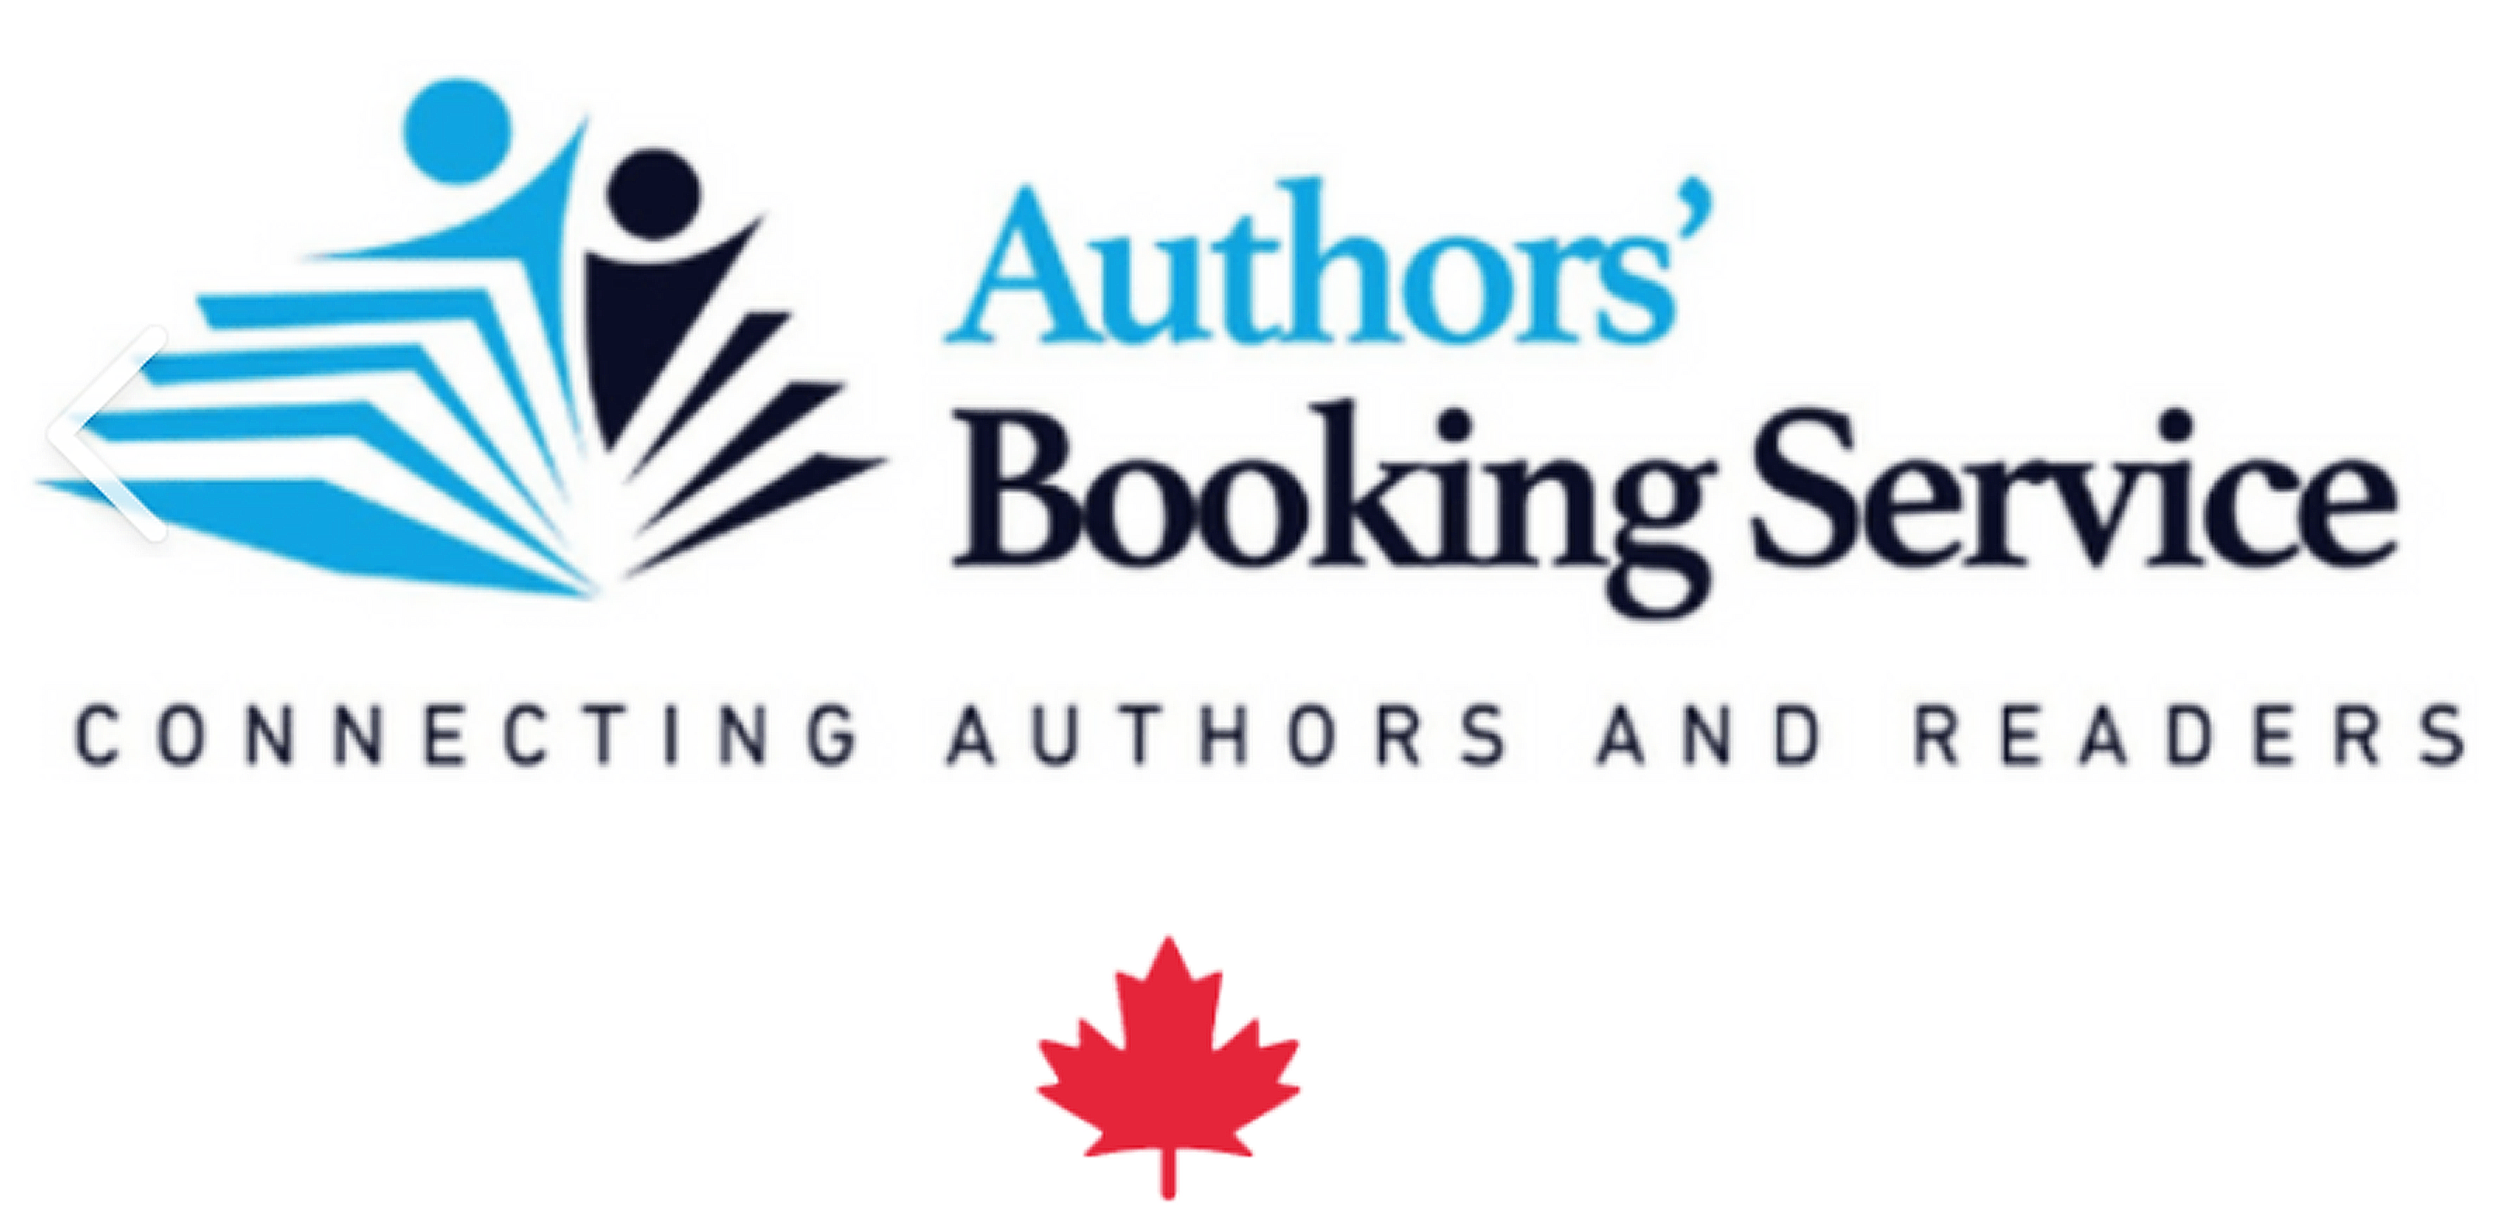 Authors_Booking_Service_01.png